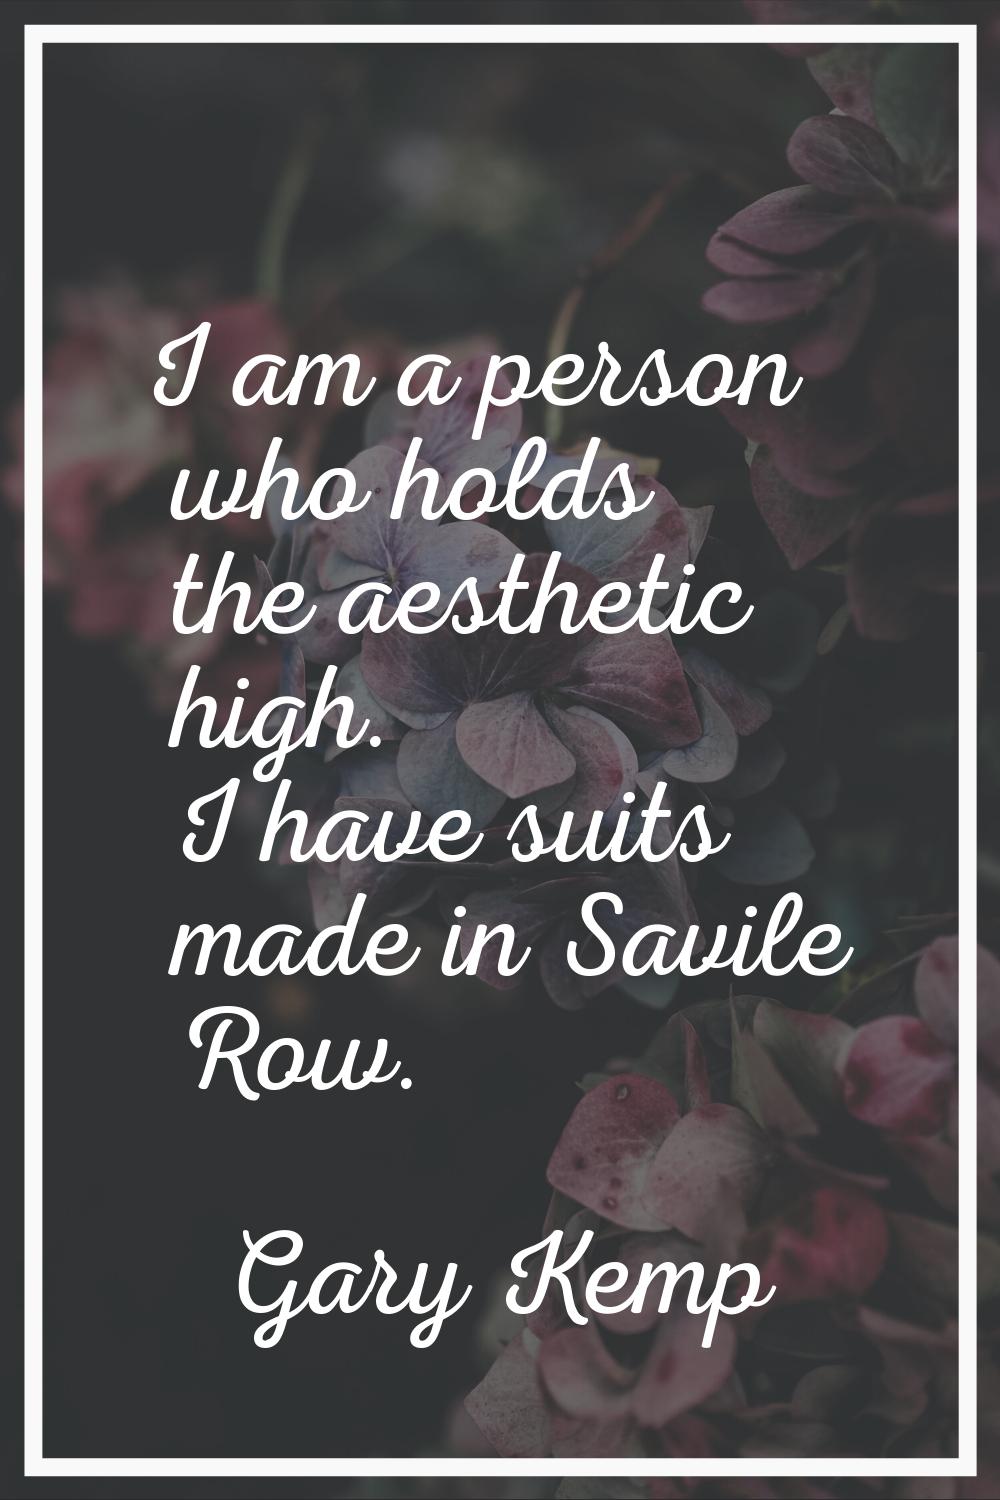 I am a person who holds the aesthetic high. I have suits made in Savile Row.